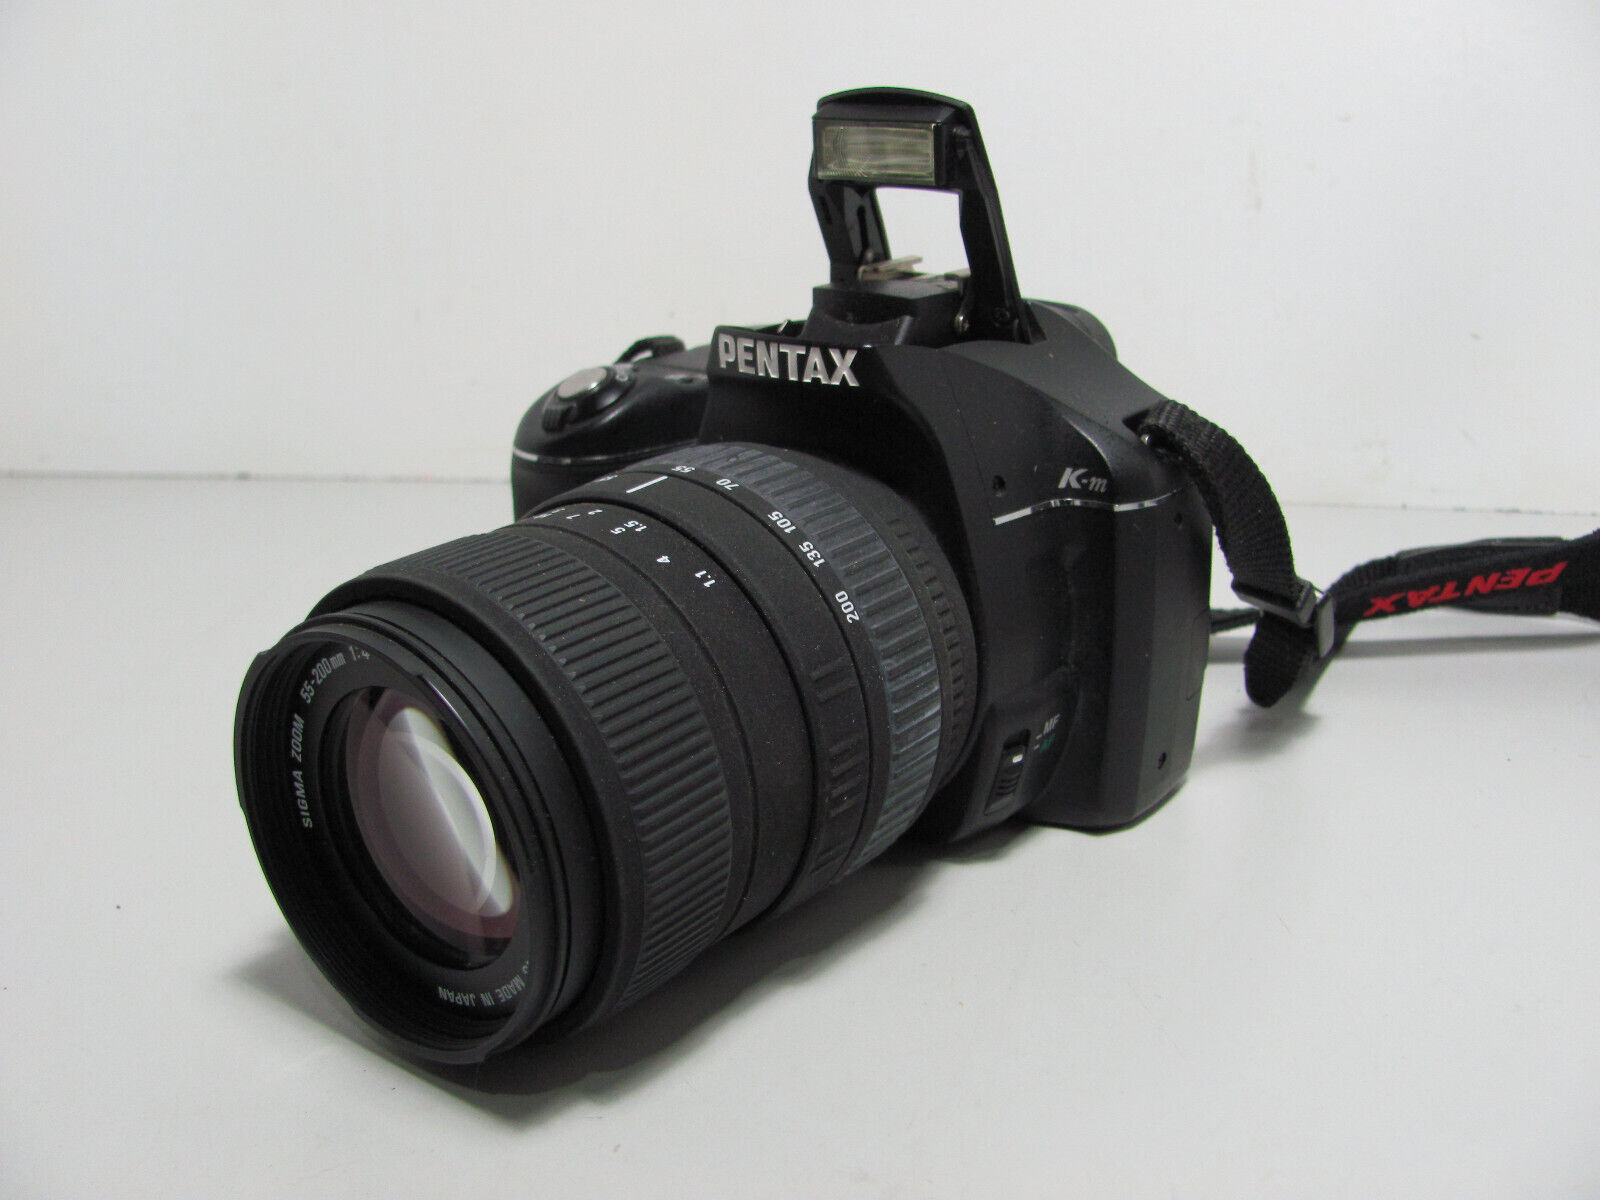 Pentax K-m 12MP DSLR Camera Sigma DC 55-200mm Lens LowShutter Count 1020 As New